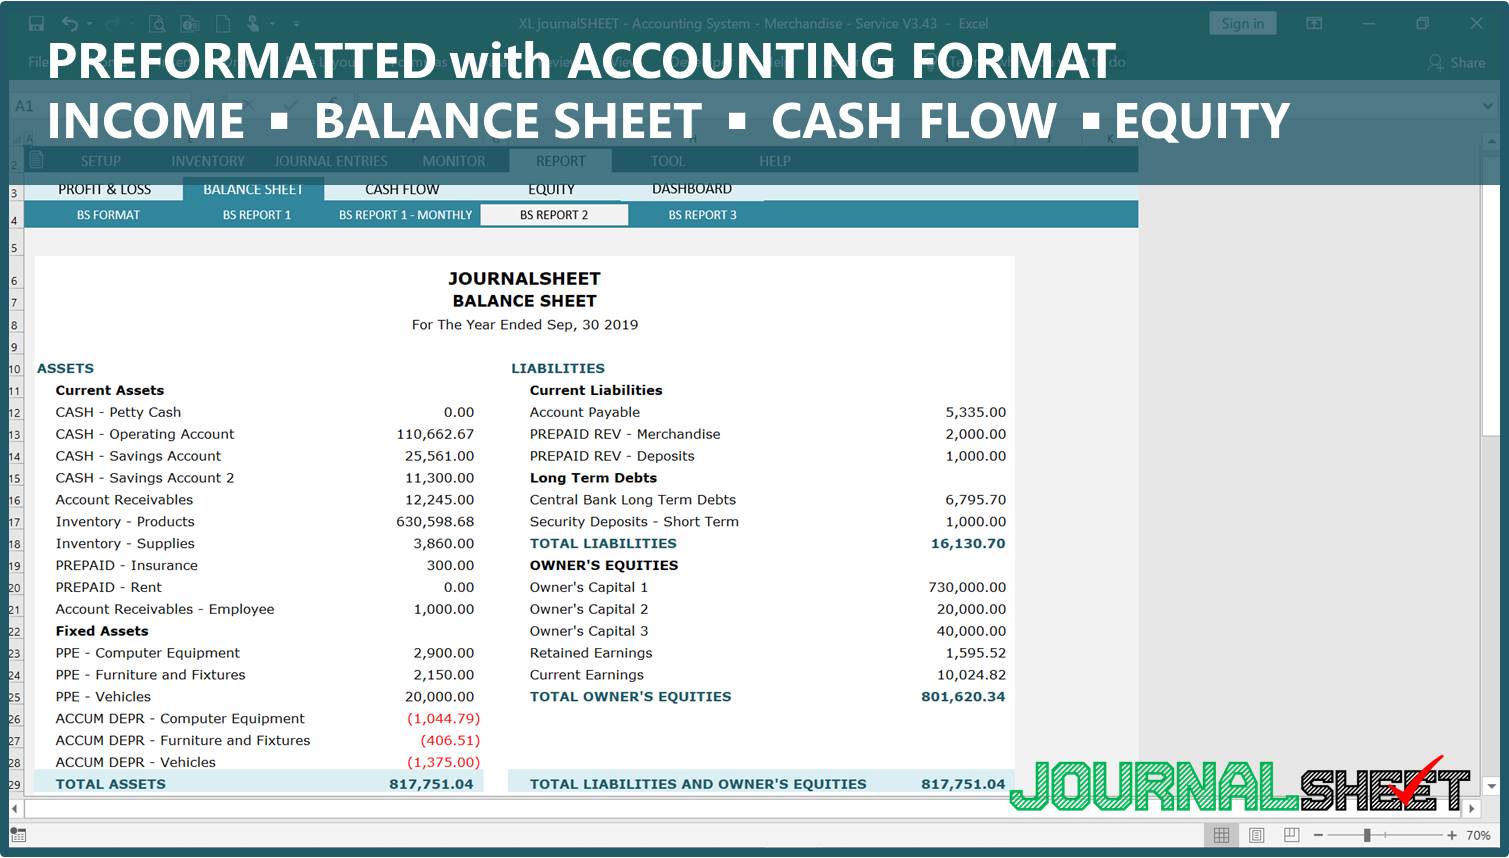 journalSHEET - Accounting System Report